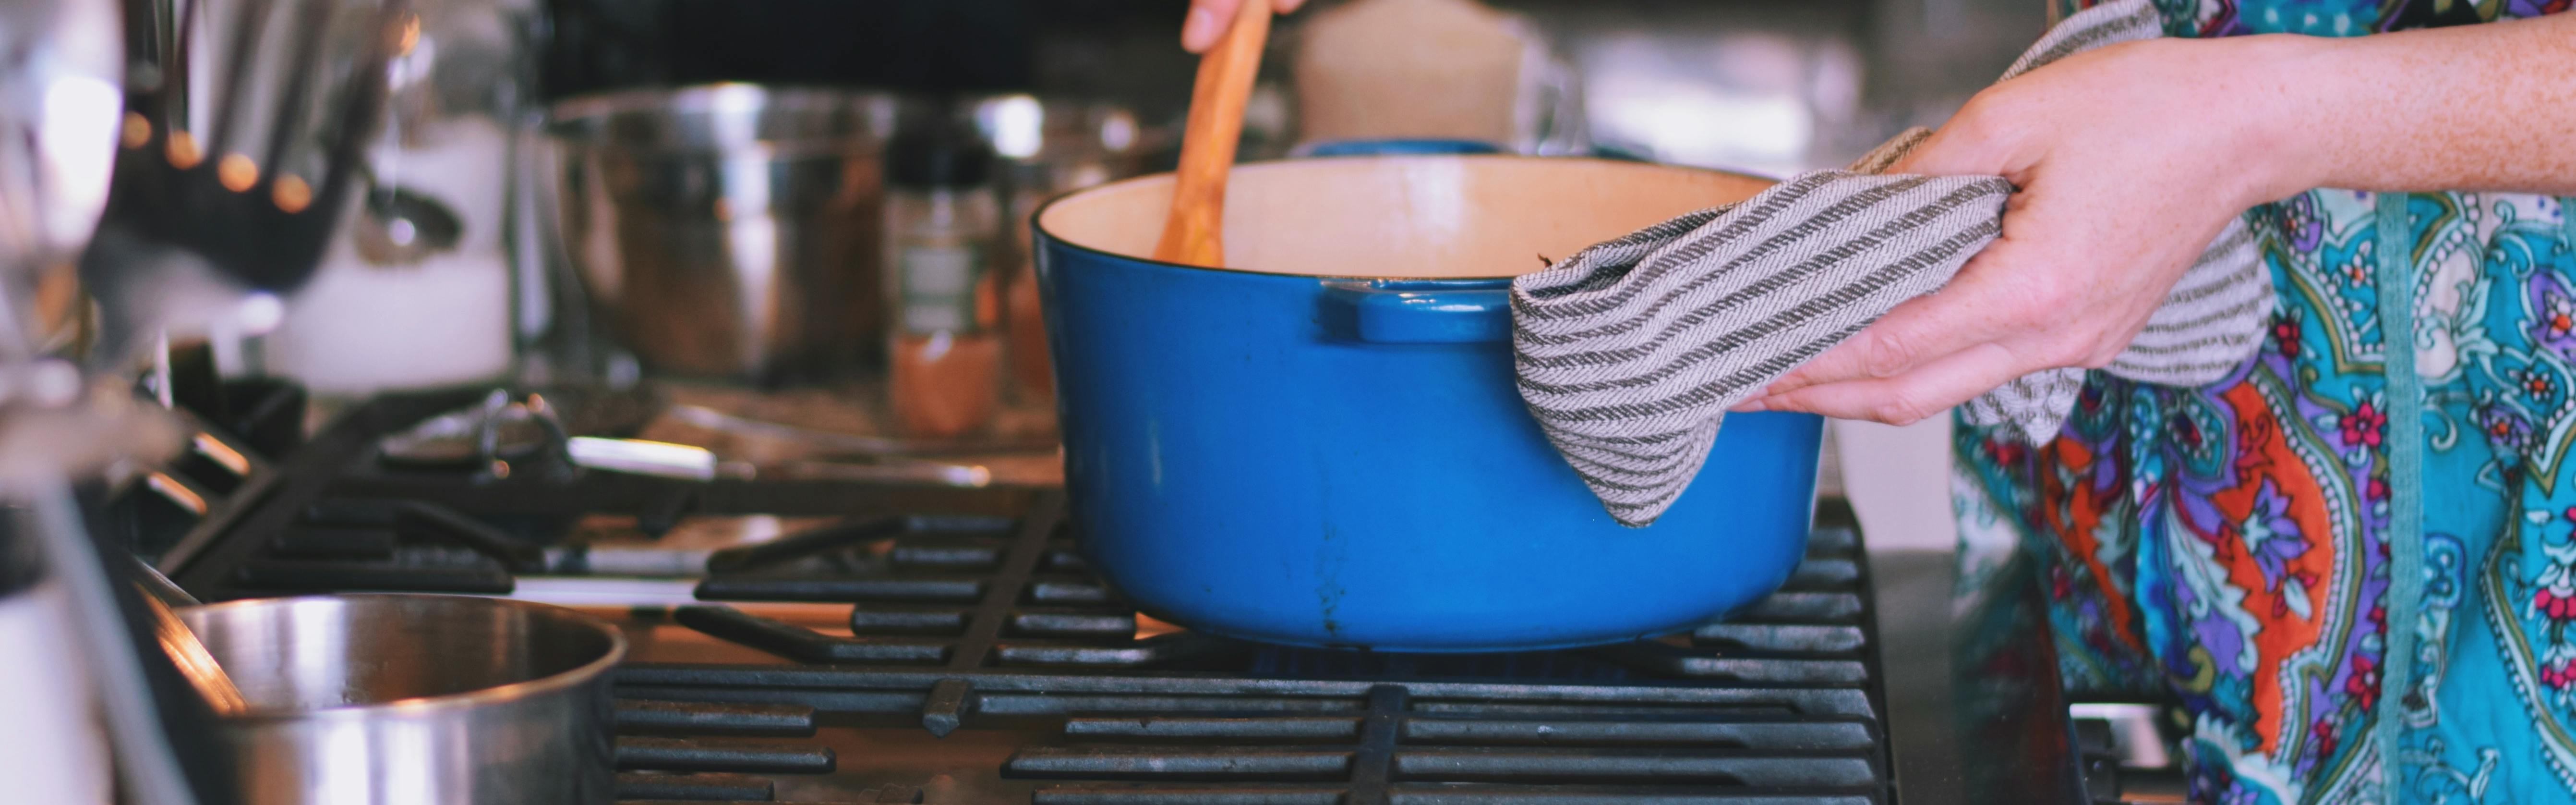 Made In Cookware - Dutch Oven 5.5 Quart - Blue - Enameled Cast Iron -  Exceptional Heat Retention & Durability - Professional Cookware - Made in  France